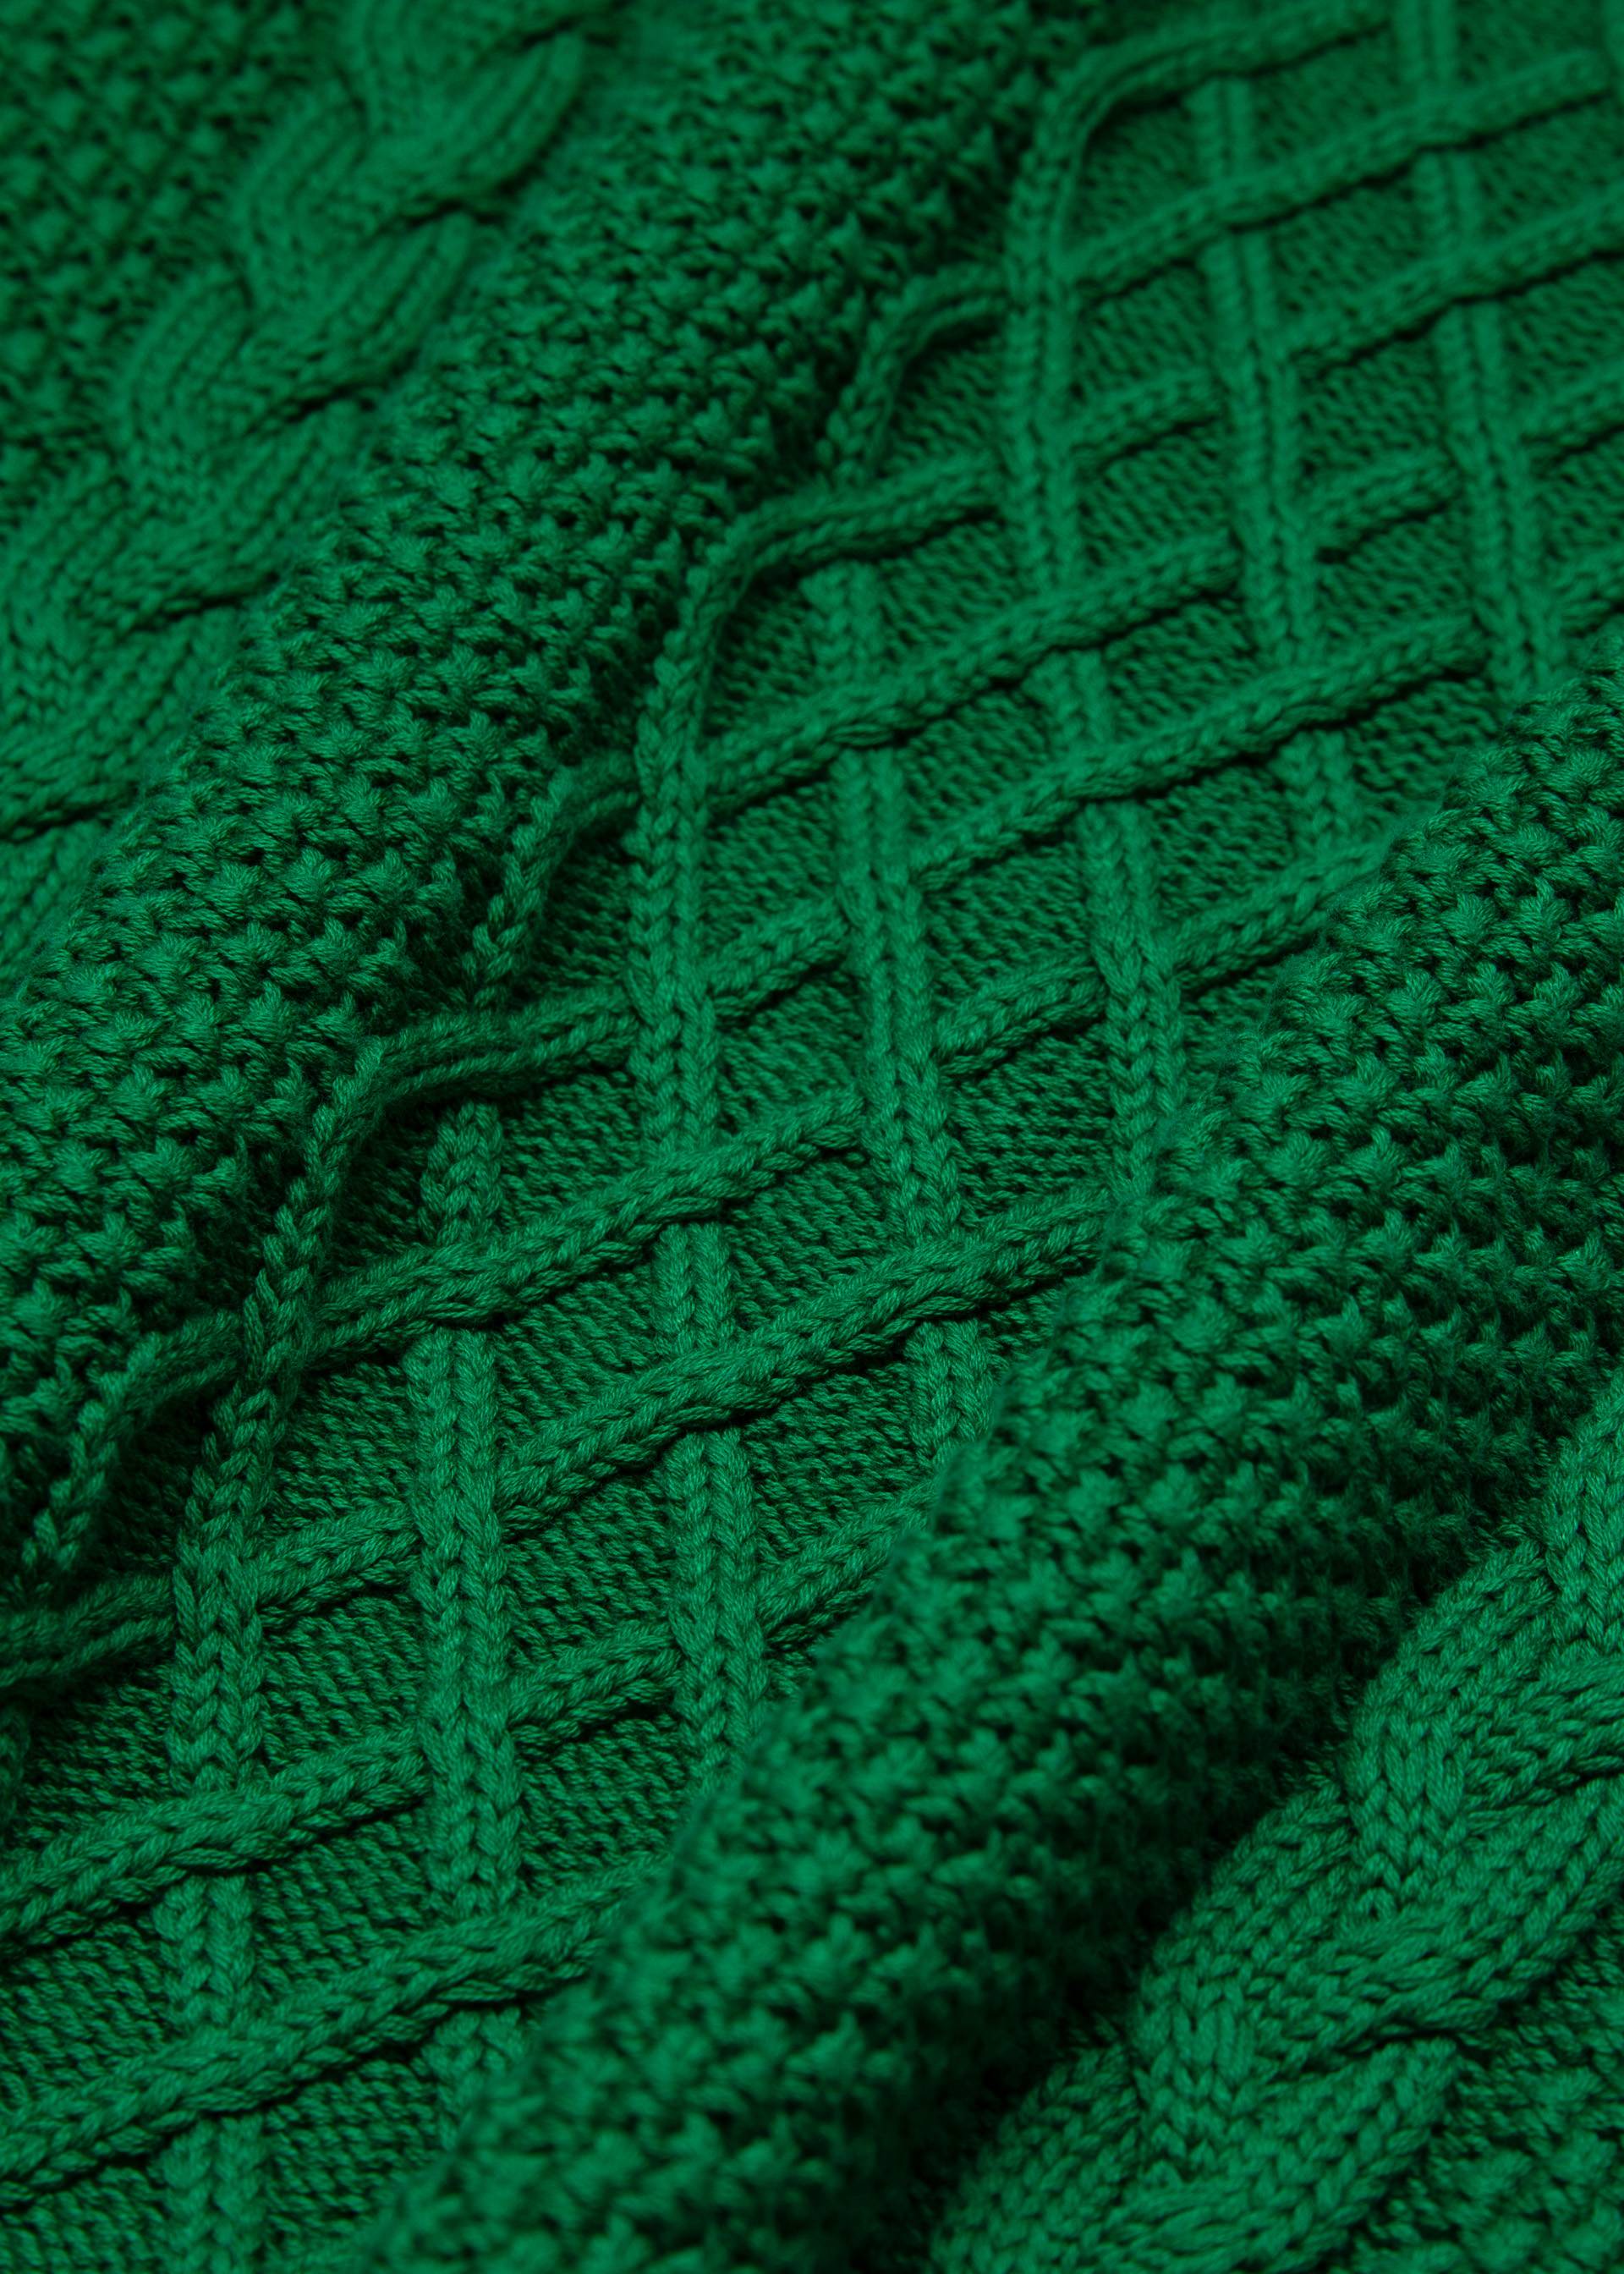 Knitted Jumper hurly burly Knit Knot, the future is green, Knitted Jumpers & Cardigans, Green